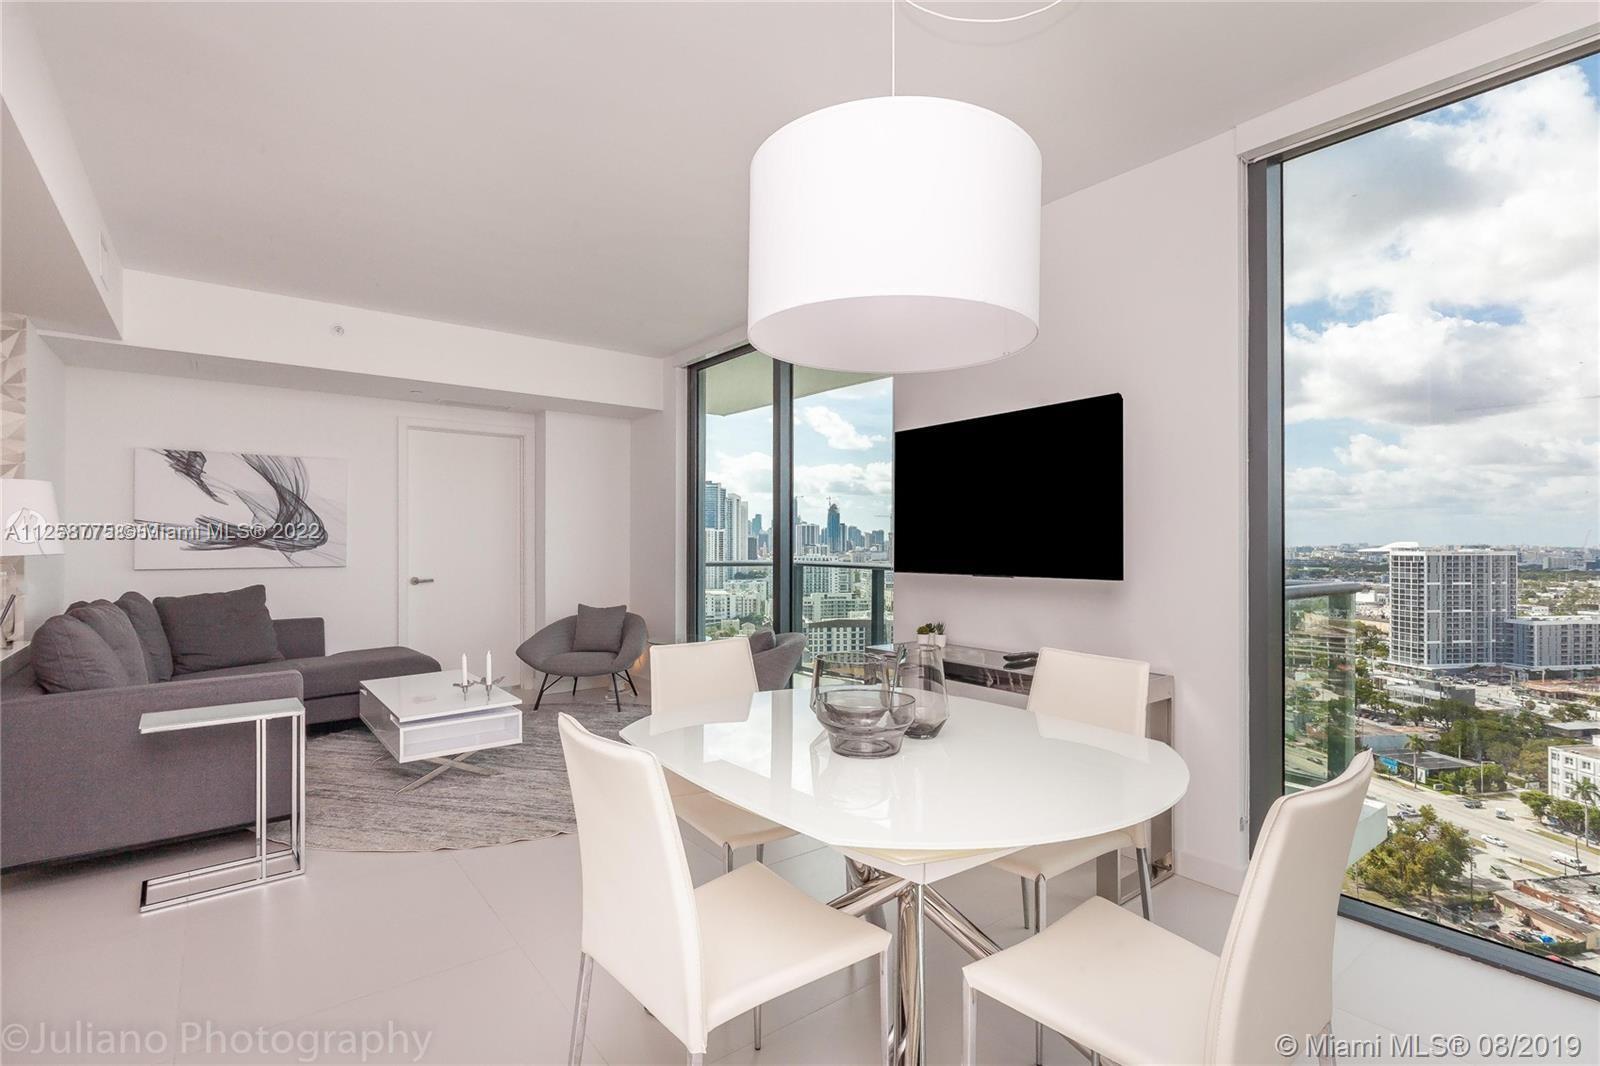 MODERN AND IMPECCABLE FURNISHED 2BED/2BATH UNIT, READY TO MOVE-IN! VERY BRIGHT, WITH OPEN FLOOR PLAN